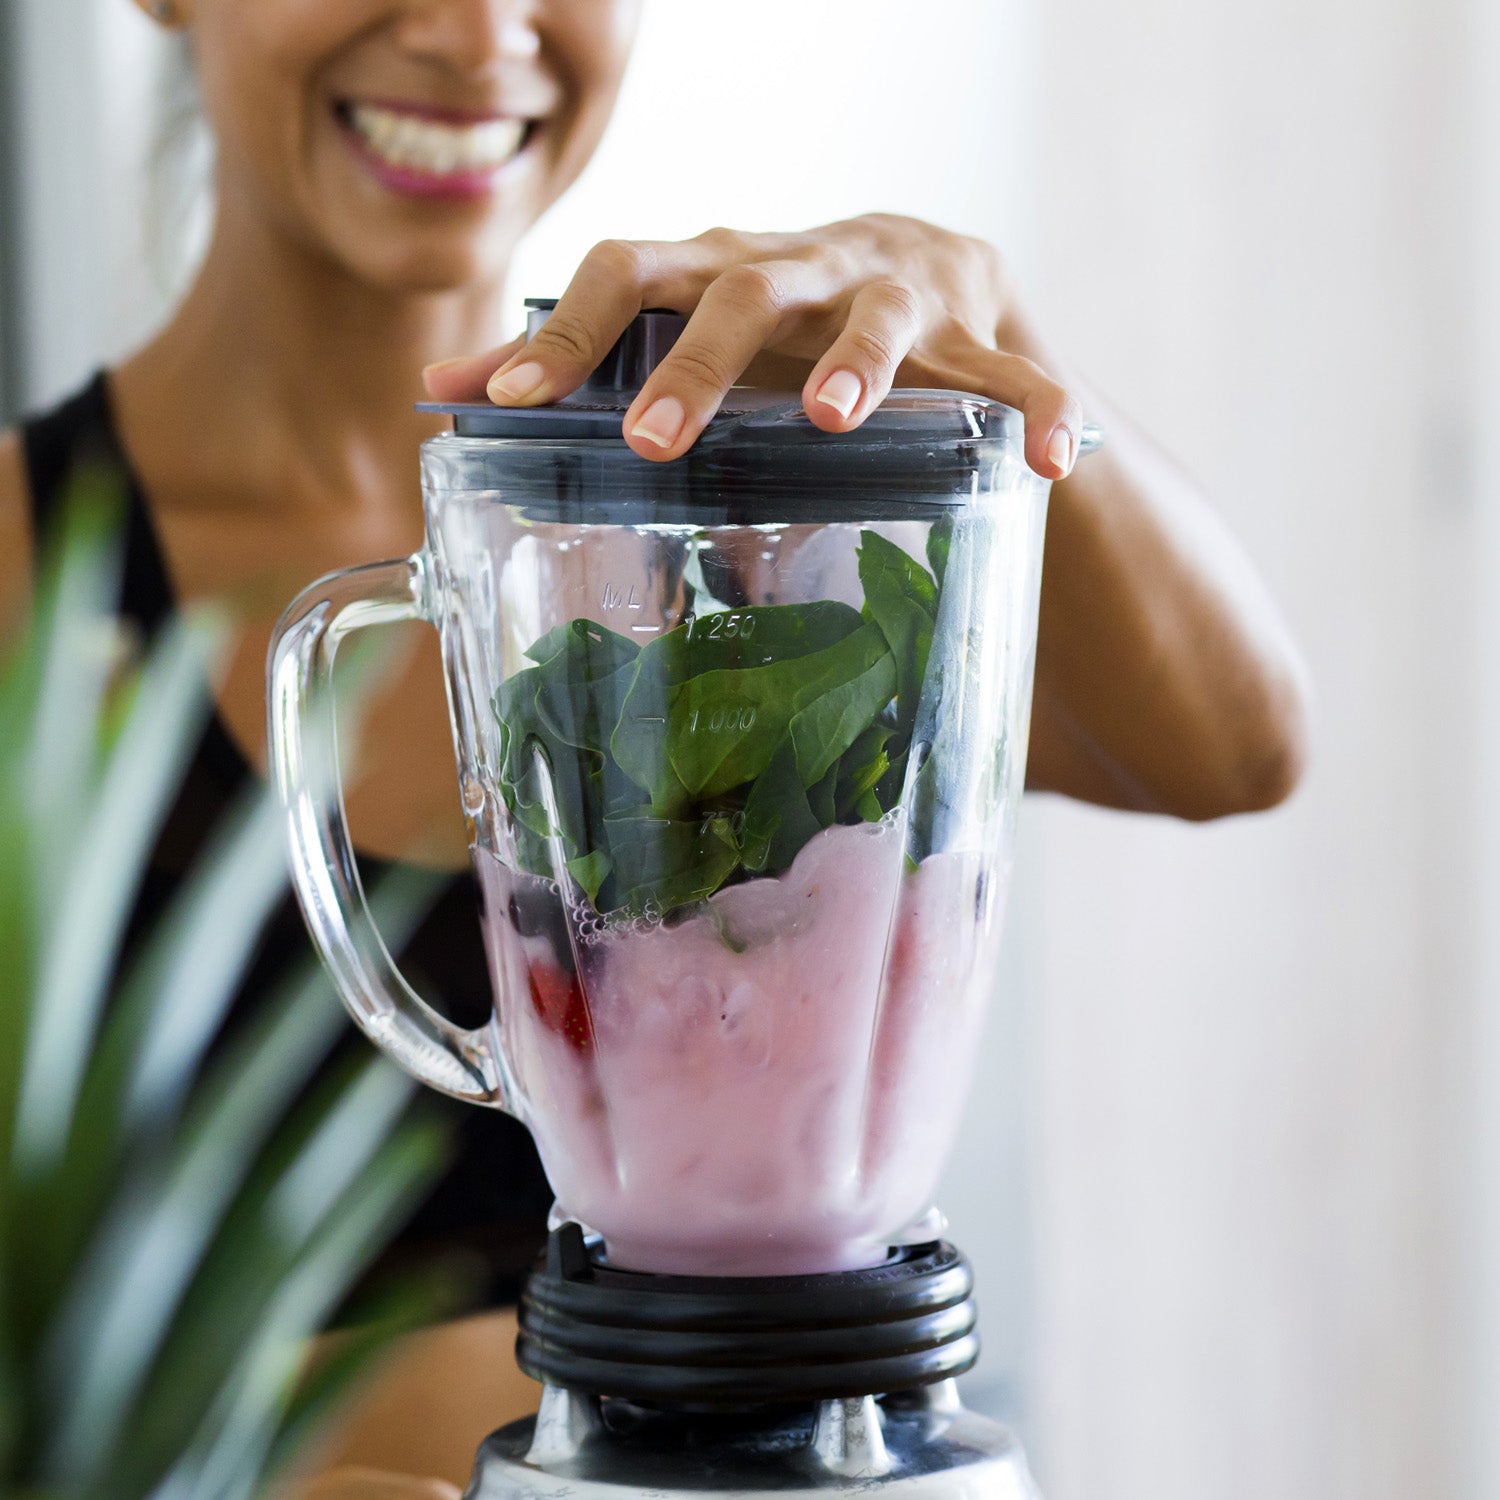 Top 6 Blenders For Making Smoothies